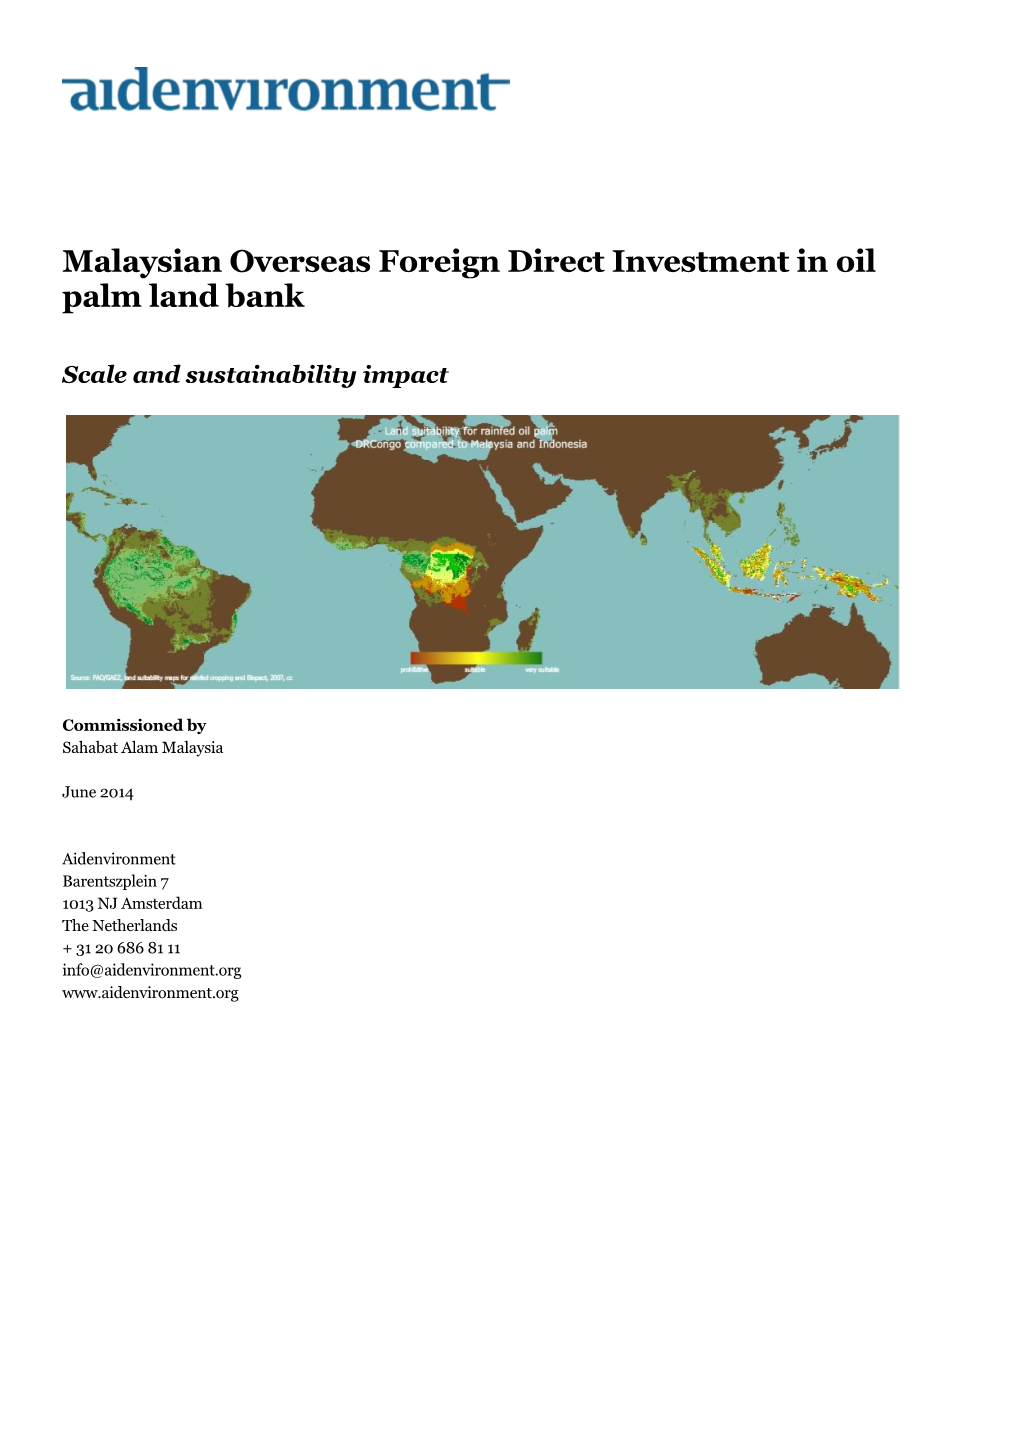 Malaysian Overseas Foreign Direct Investment in Oil Palm Land Bank